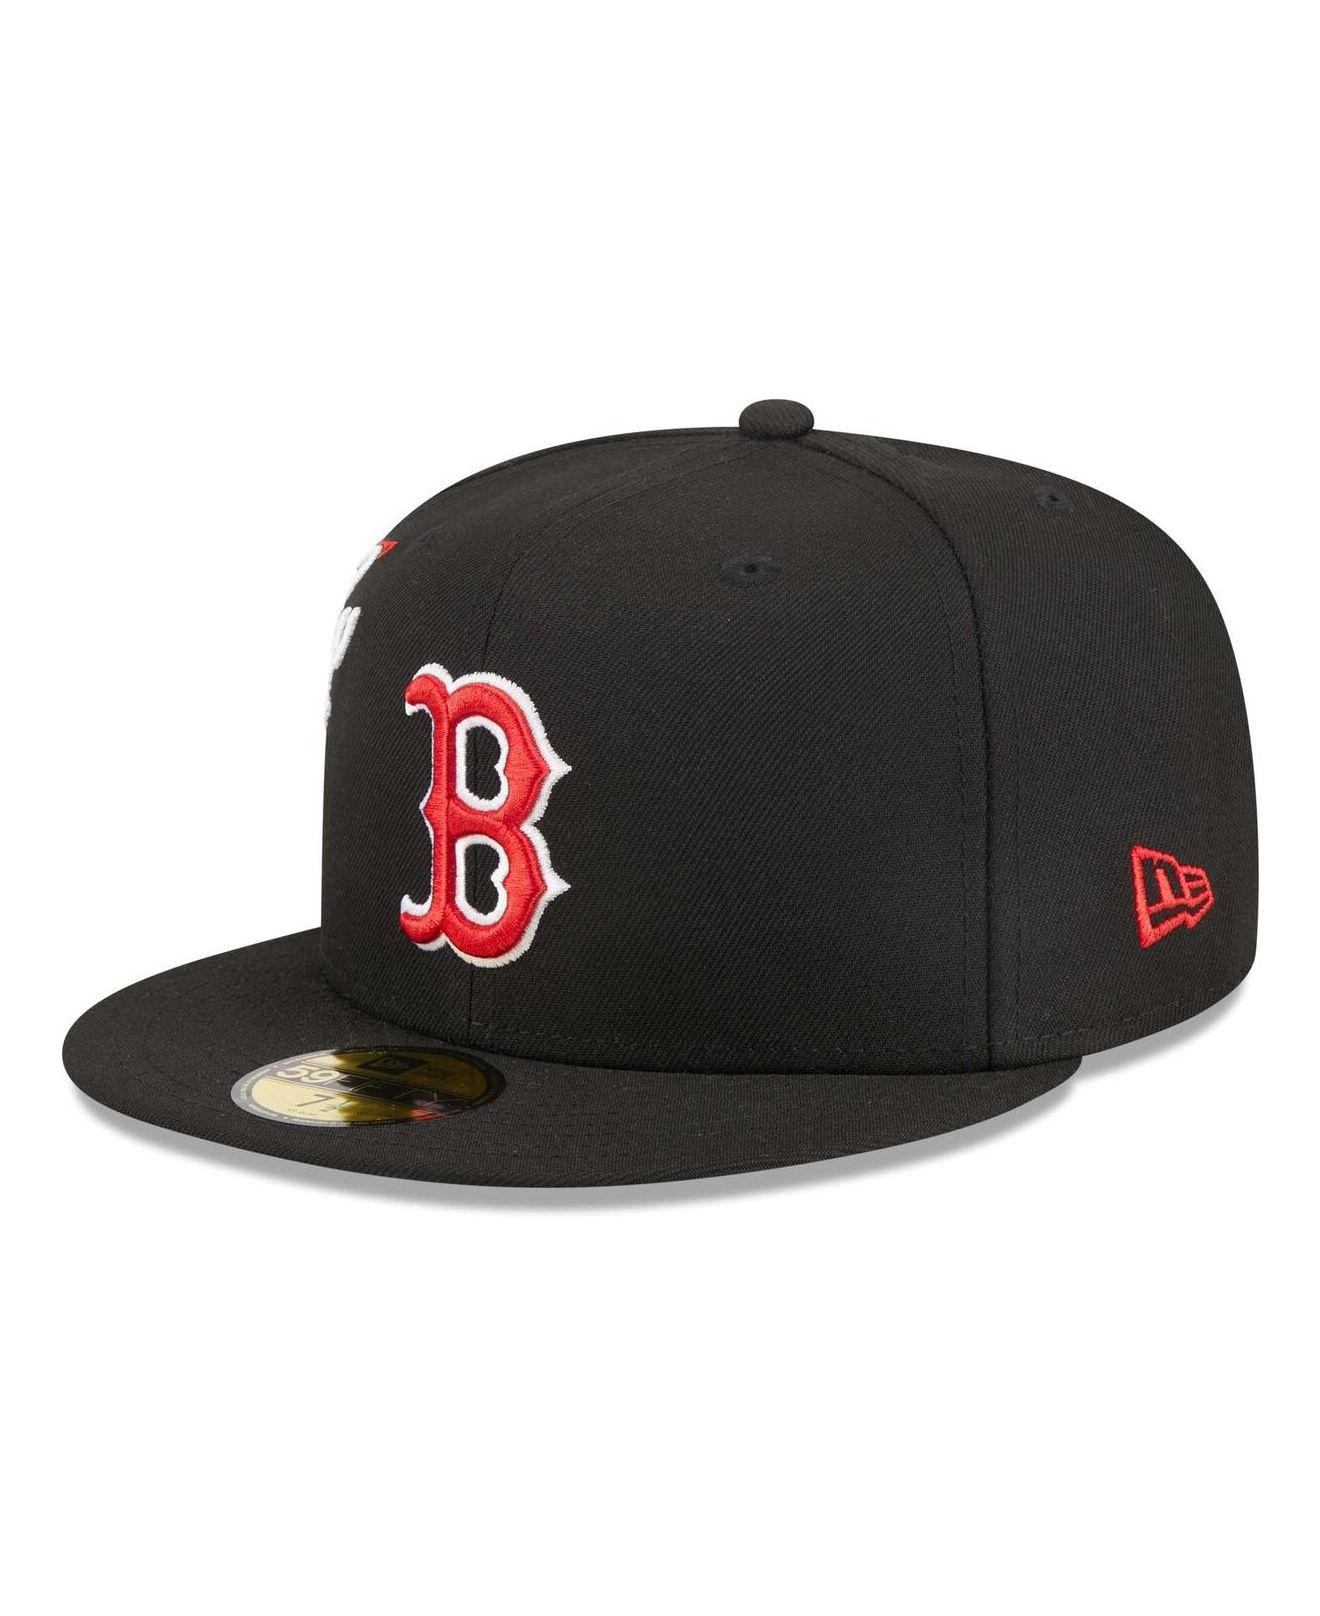 NEW ERA LETTERMAN BALTIMORE ORIOLES FITTED HAT (RED/BLACK